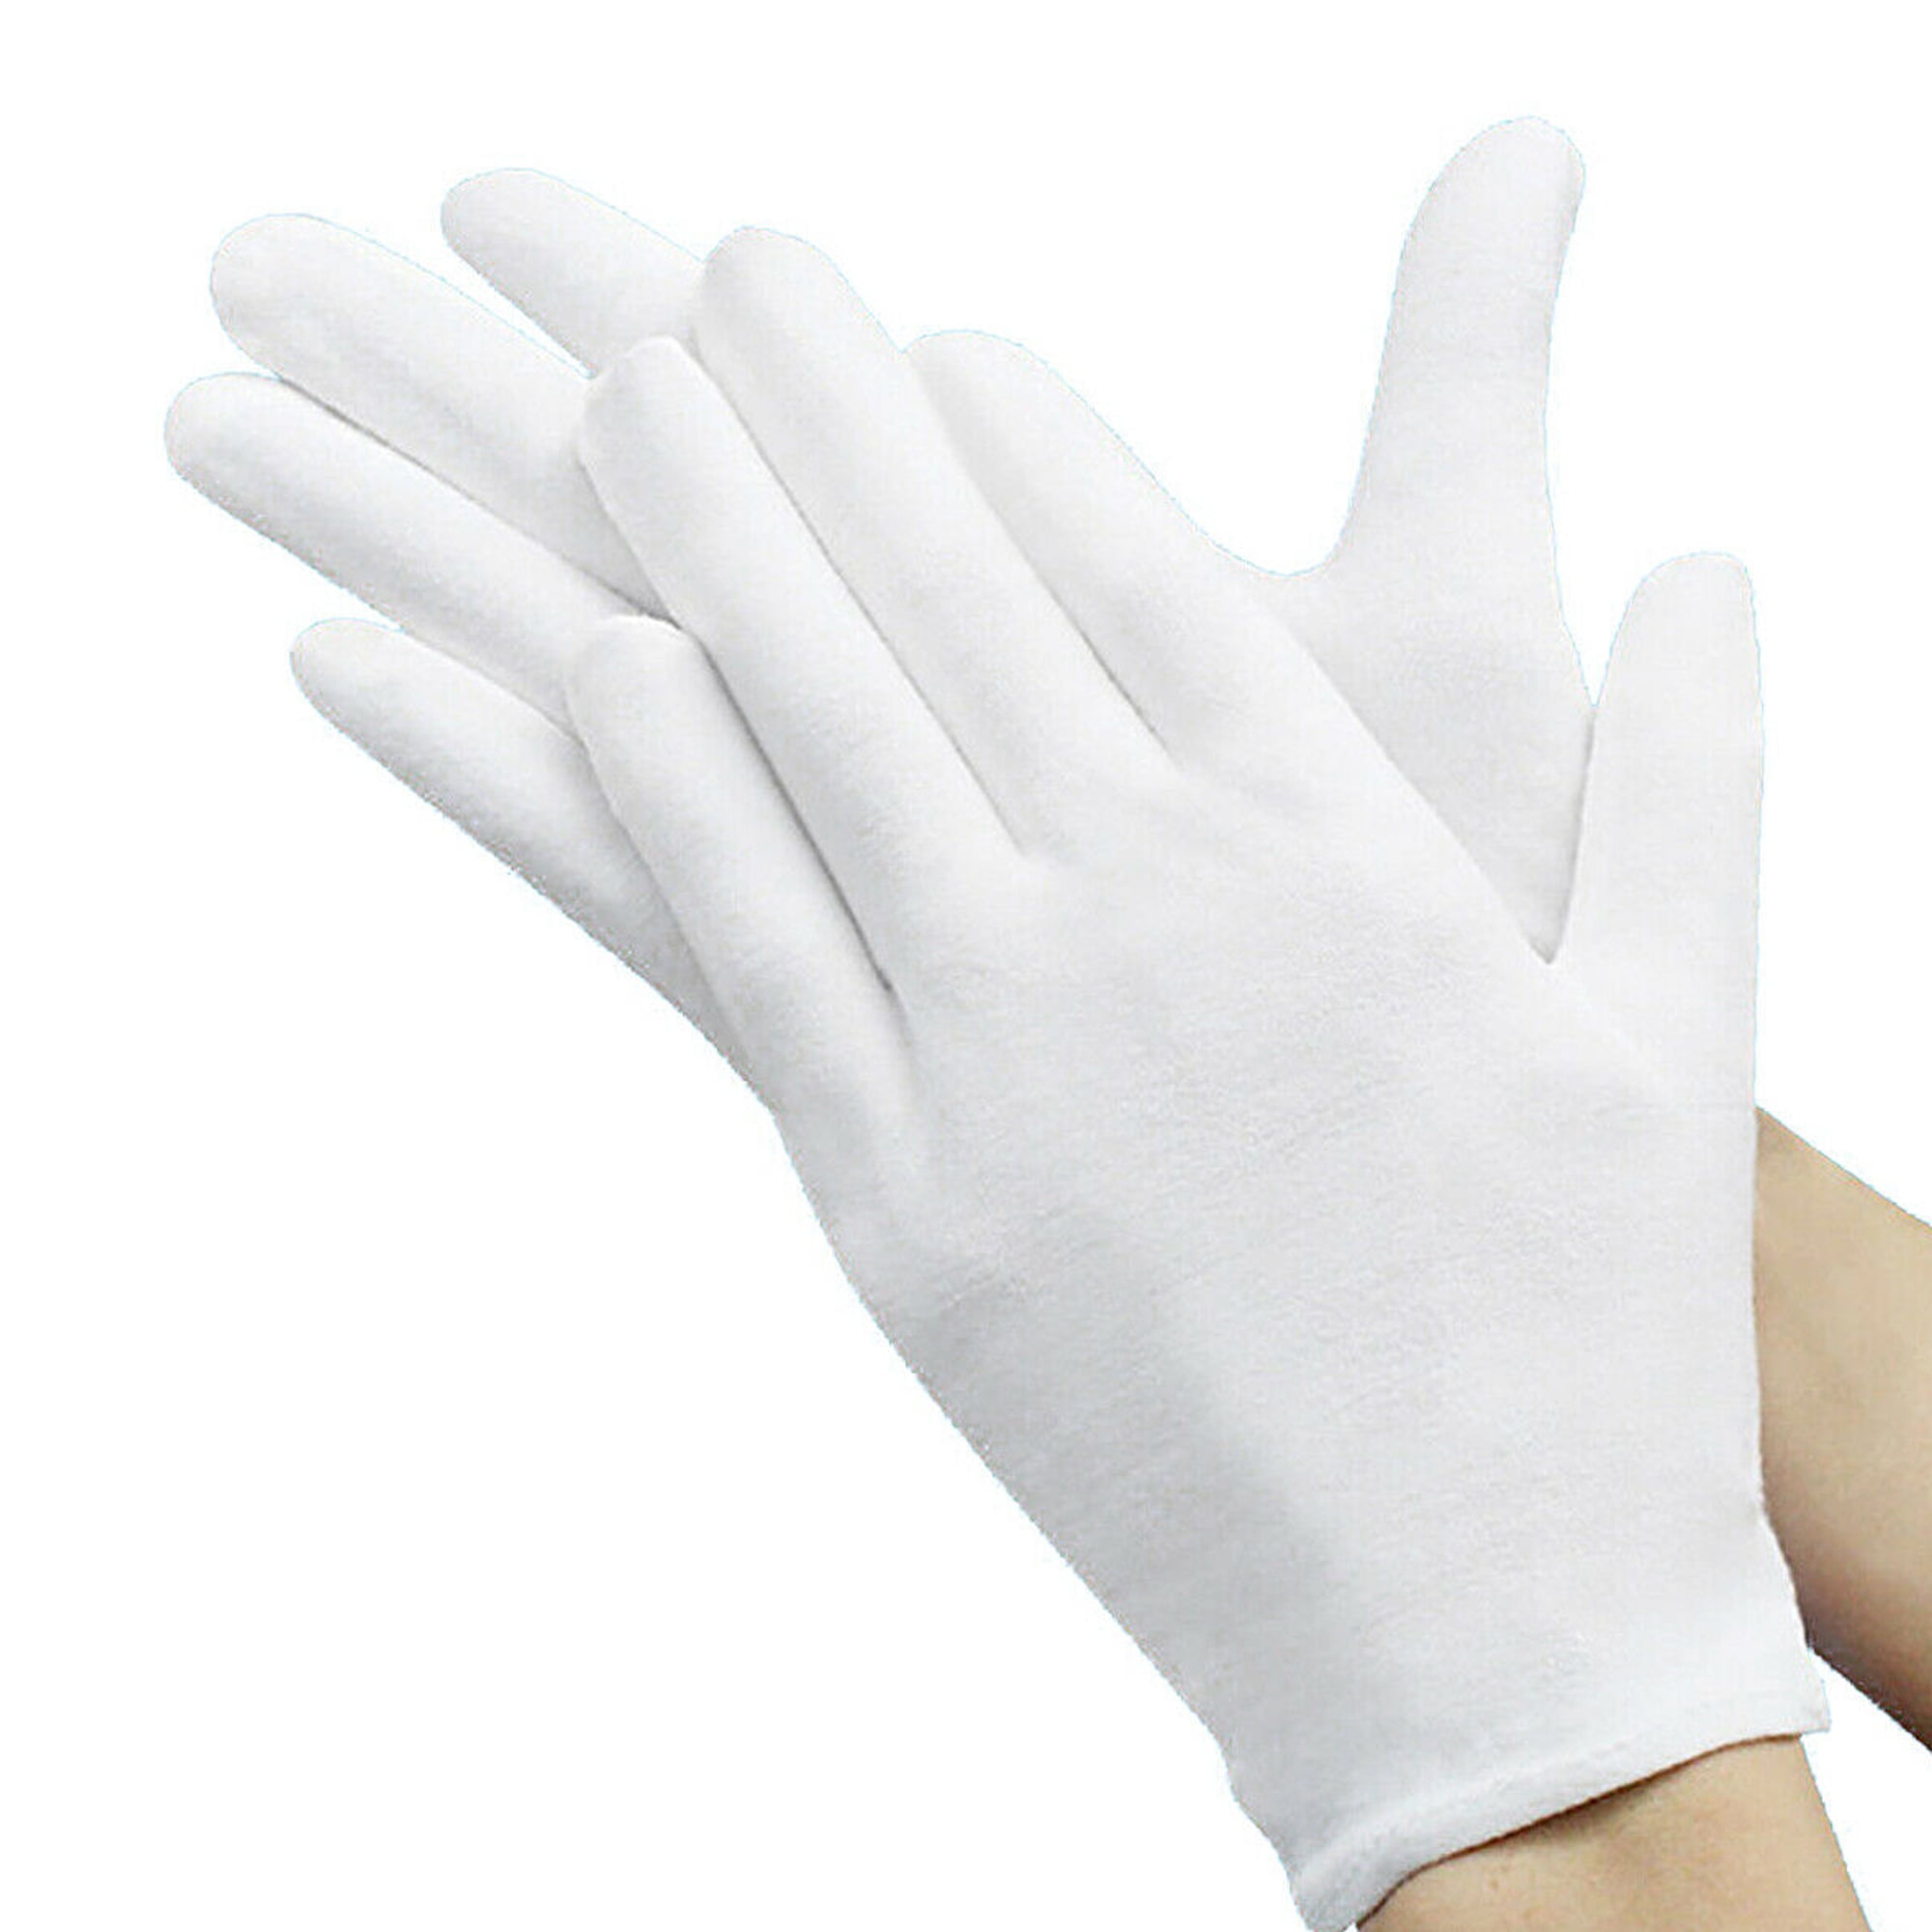 6 Pairs white gloves cotton soft thin coin jewelry silver inspection work glWCH 